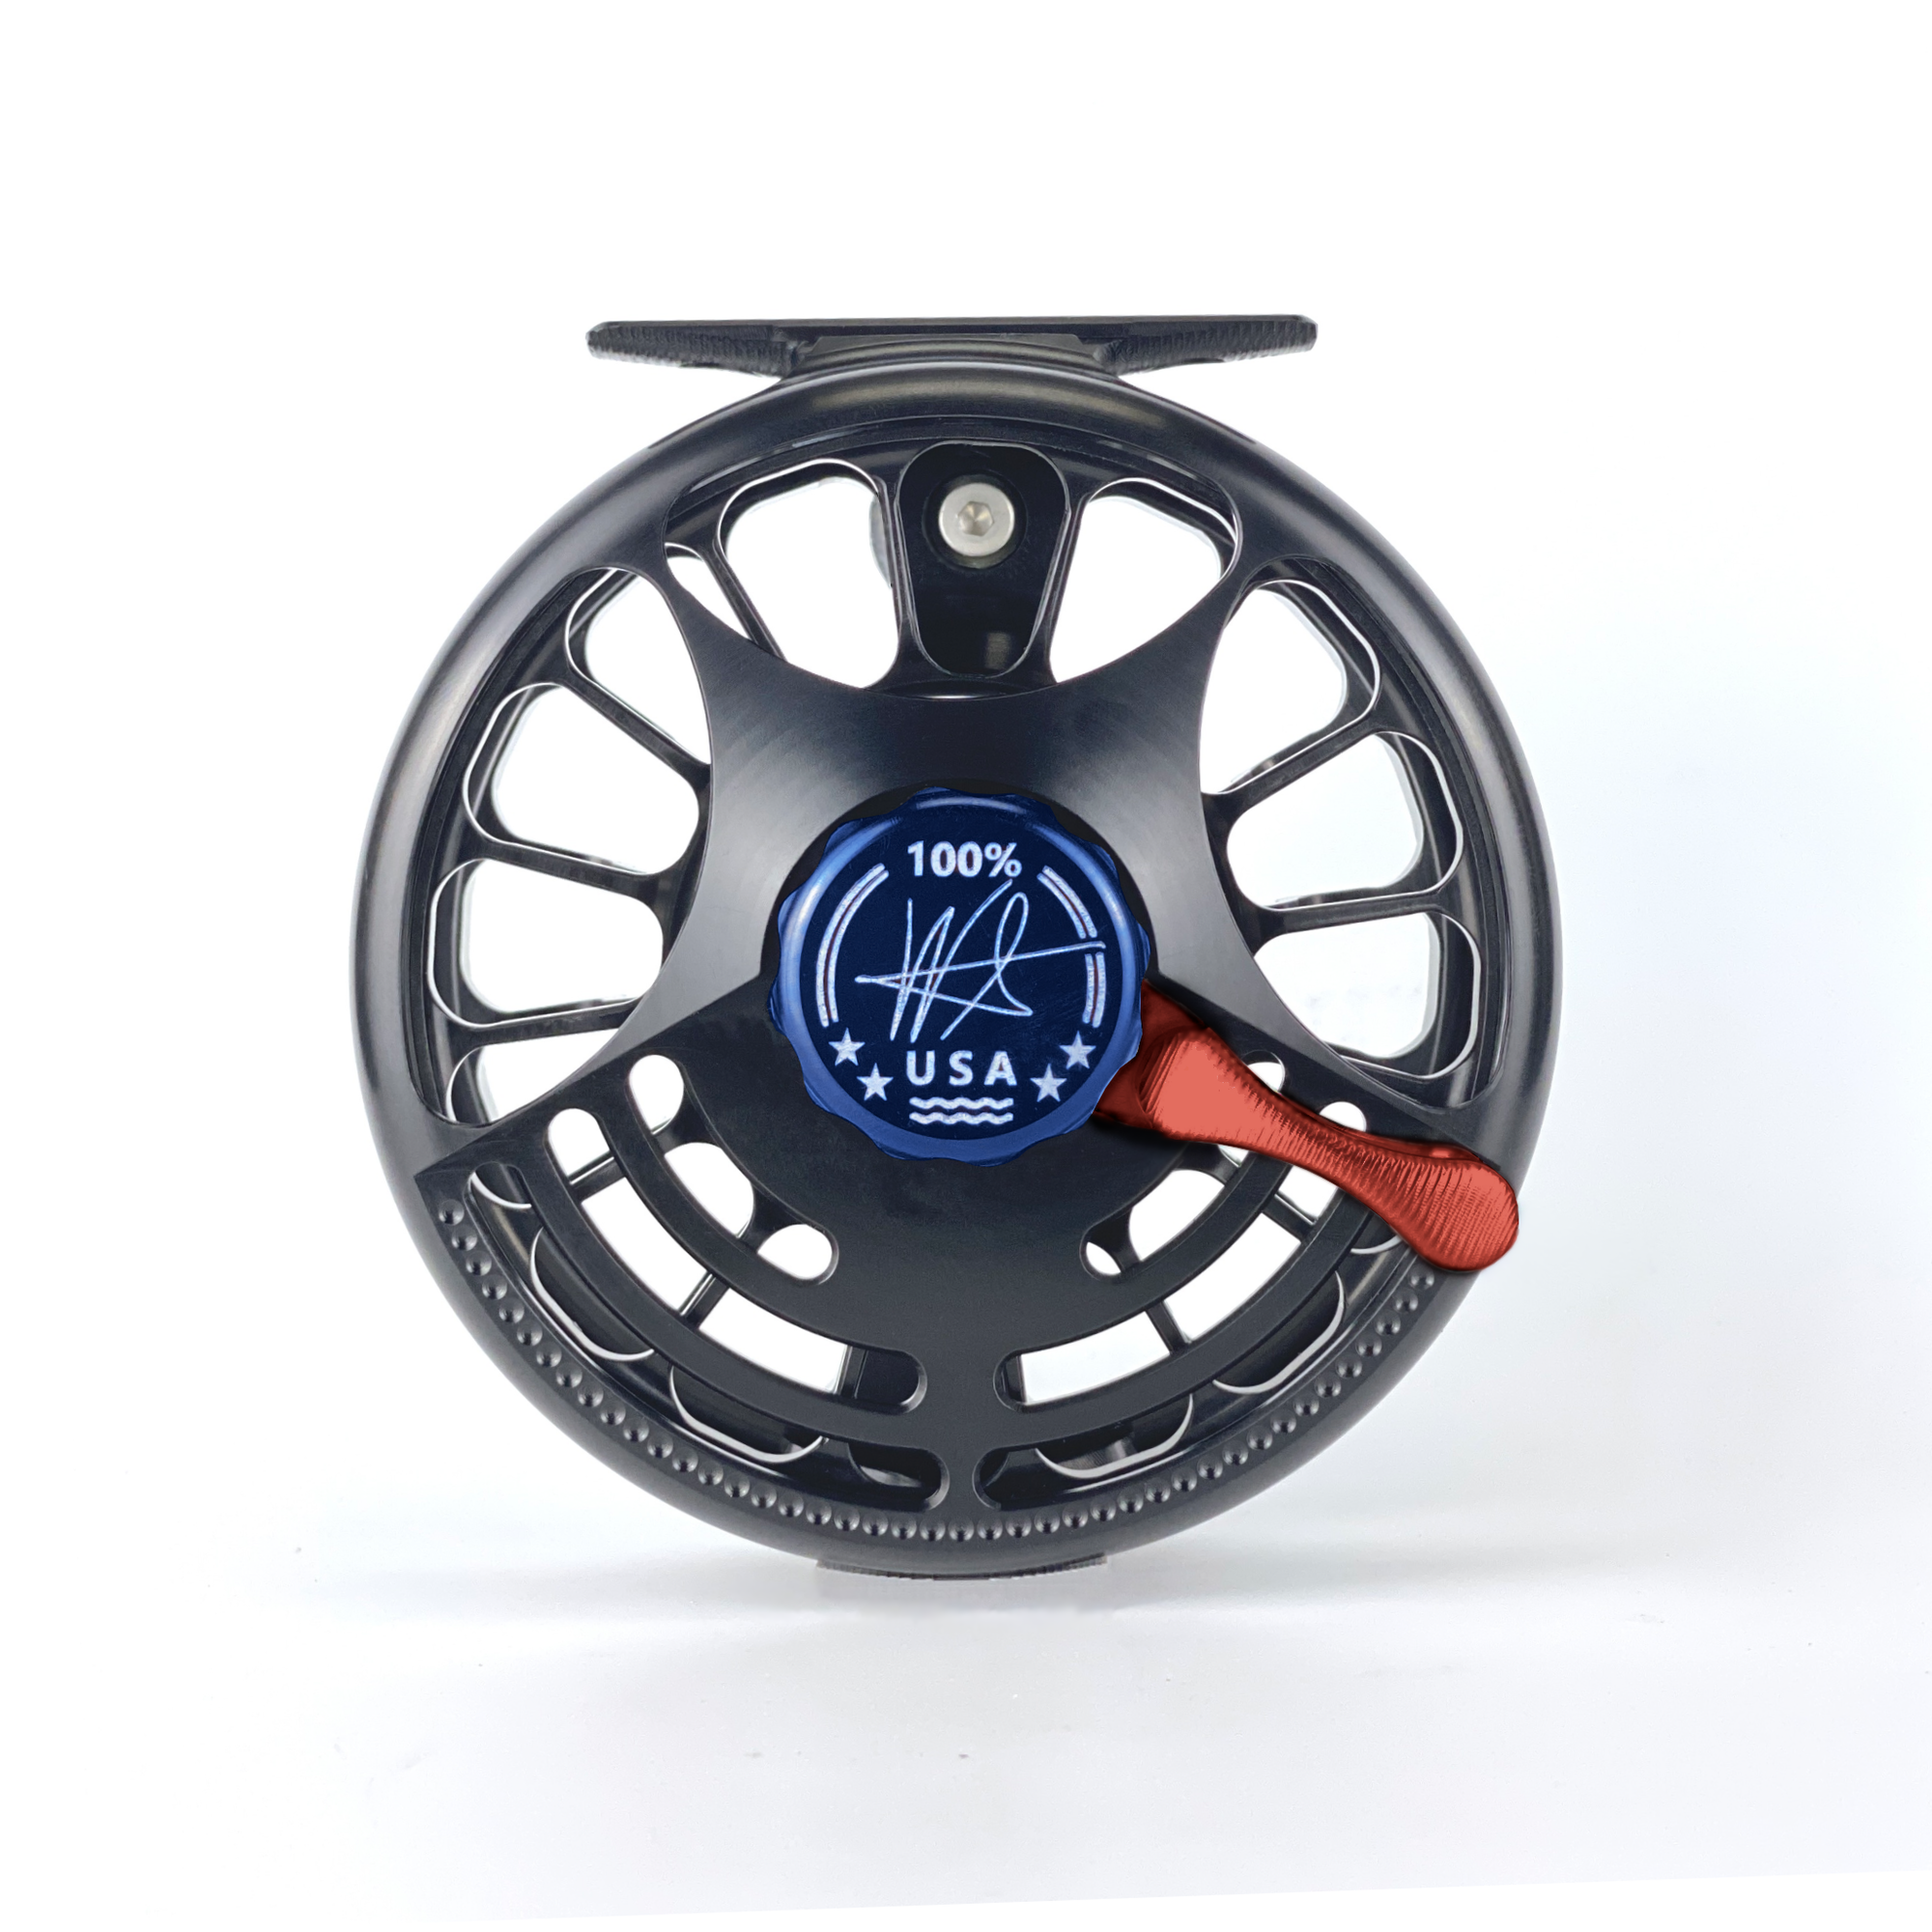 This outstanding reel, tailored to the 6-9 weight class, boasts a 4" diameter with a narrow design, ensuring a smooth and efficient line pickup.